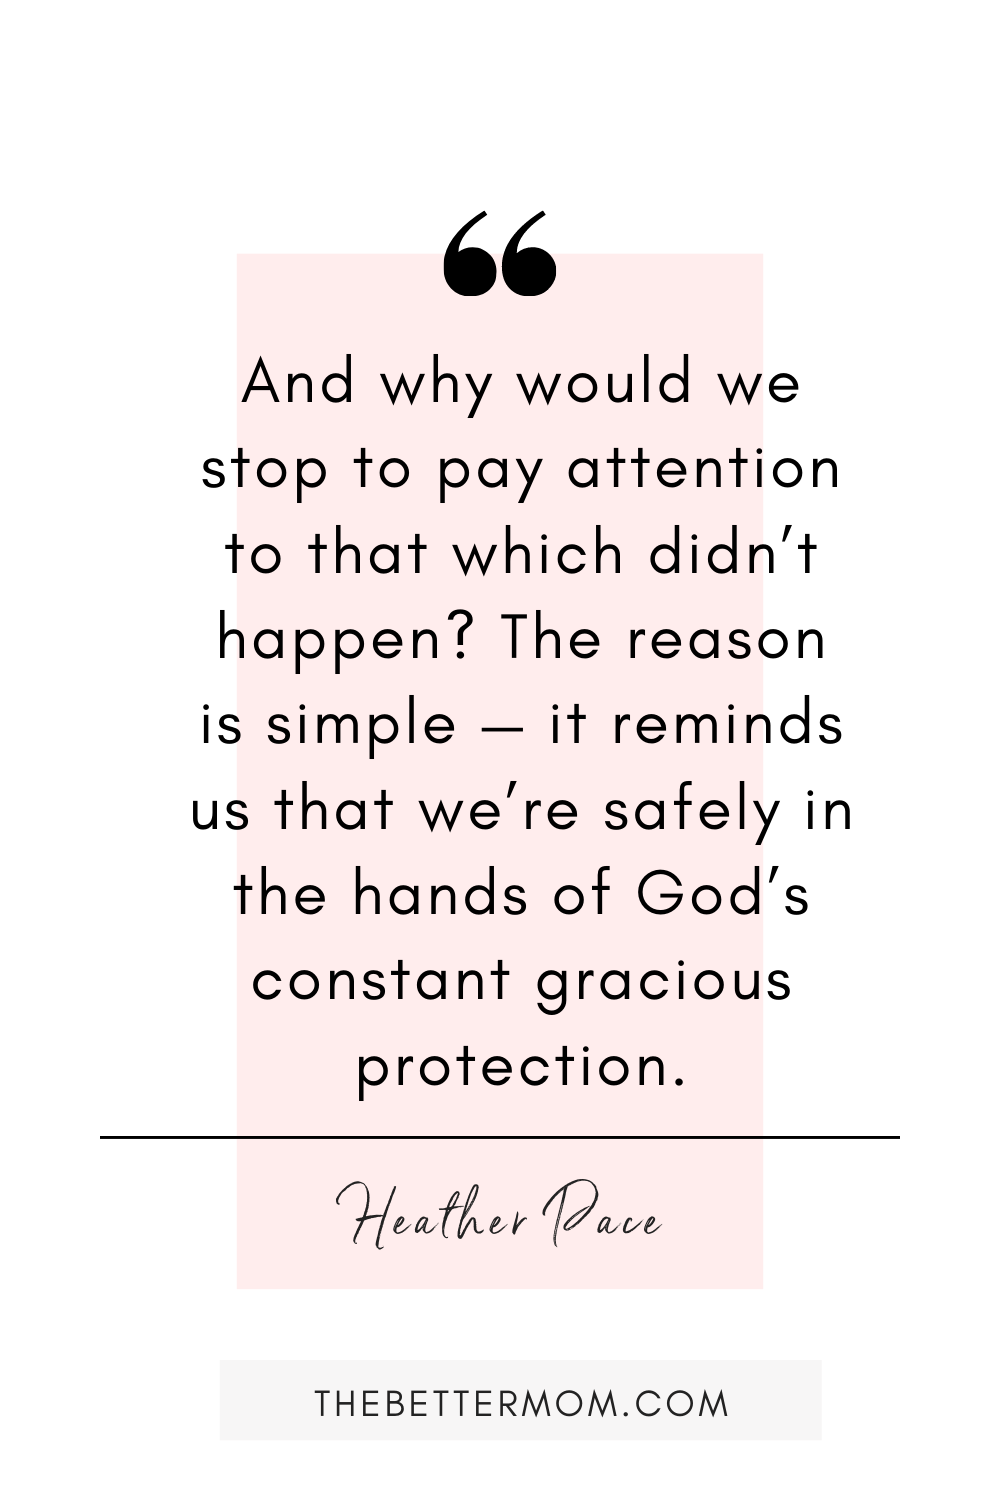 There are a lot of tragedies that do not occur. Things could go seriously wrong just about every single day, and usually, they don’t. This is because we’re safely in the hands of God’s constant gracious protection! Let’s notice his display of kindness in those ways that normally get overlooked.